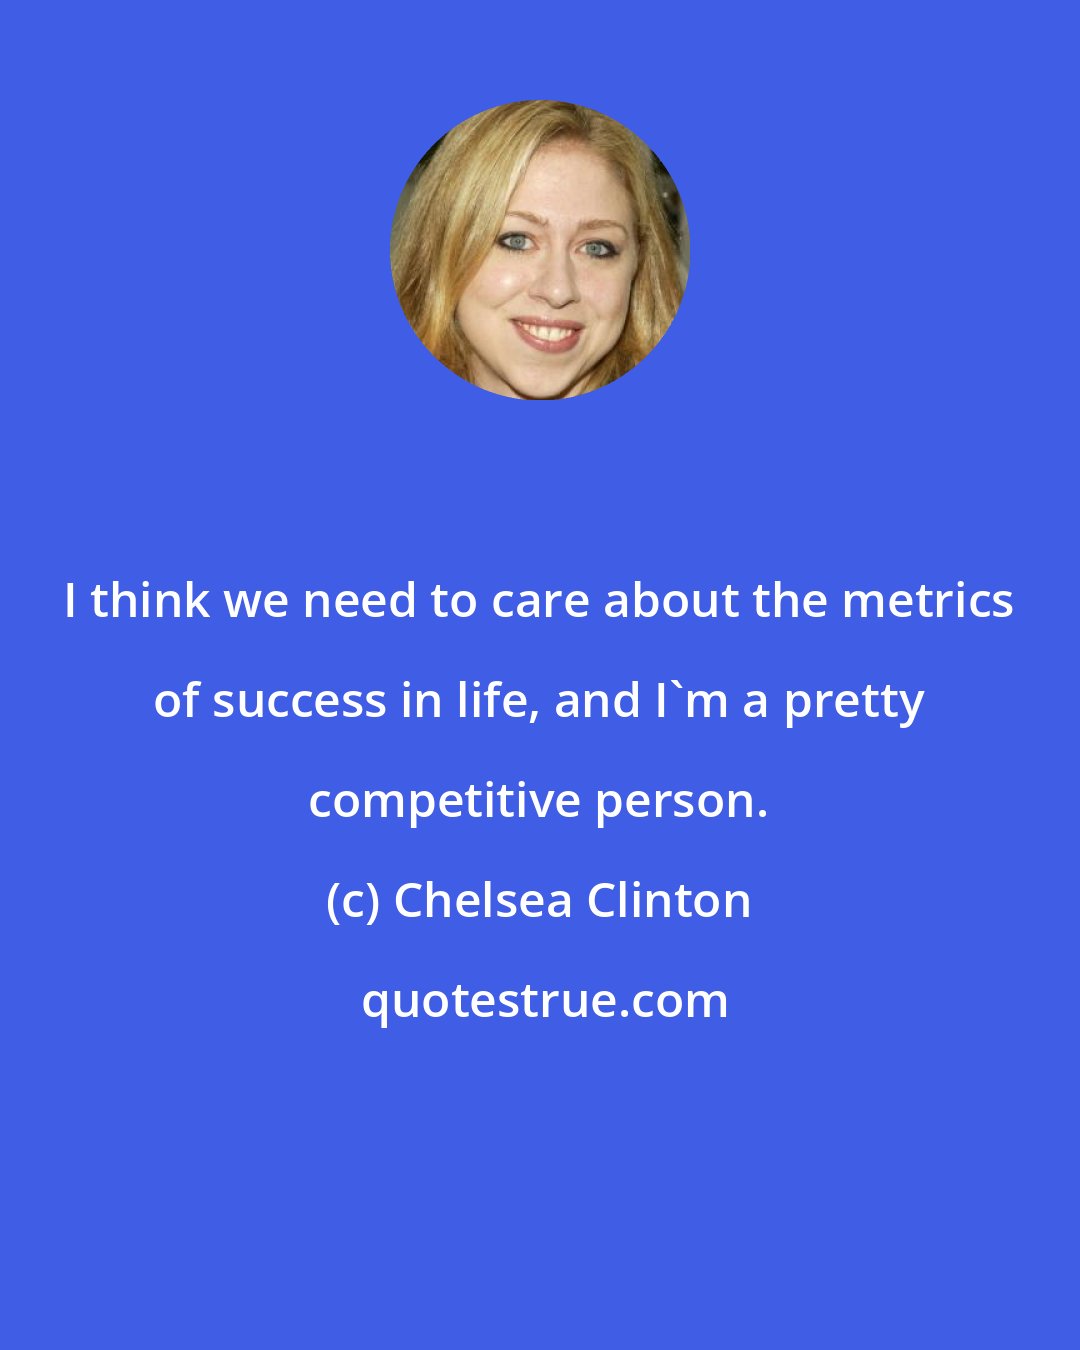 Chelsea Clinton: I think we need to care about the metrics of success in life, and I'm a pretty competitive person.